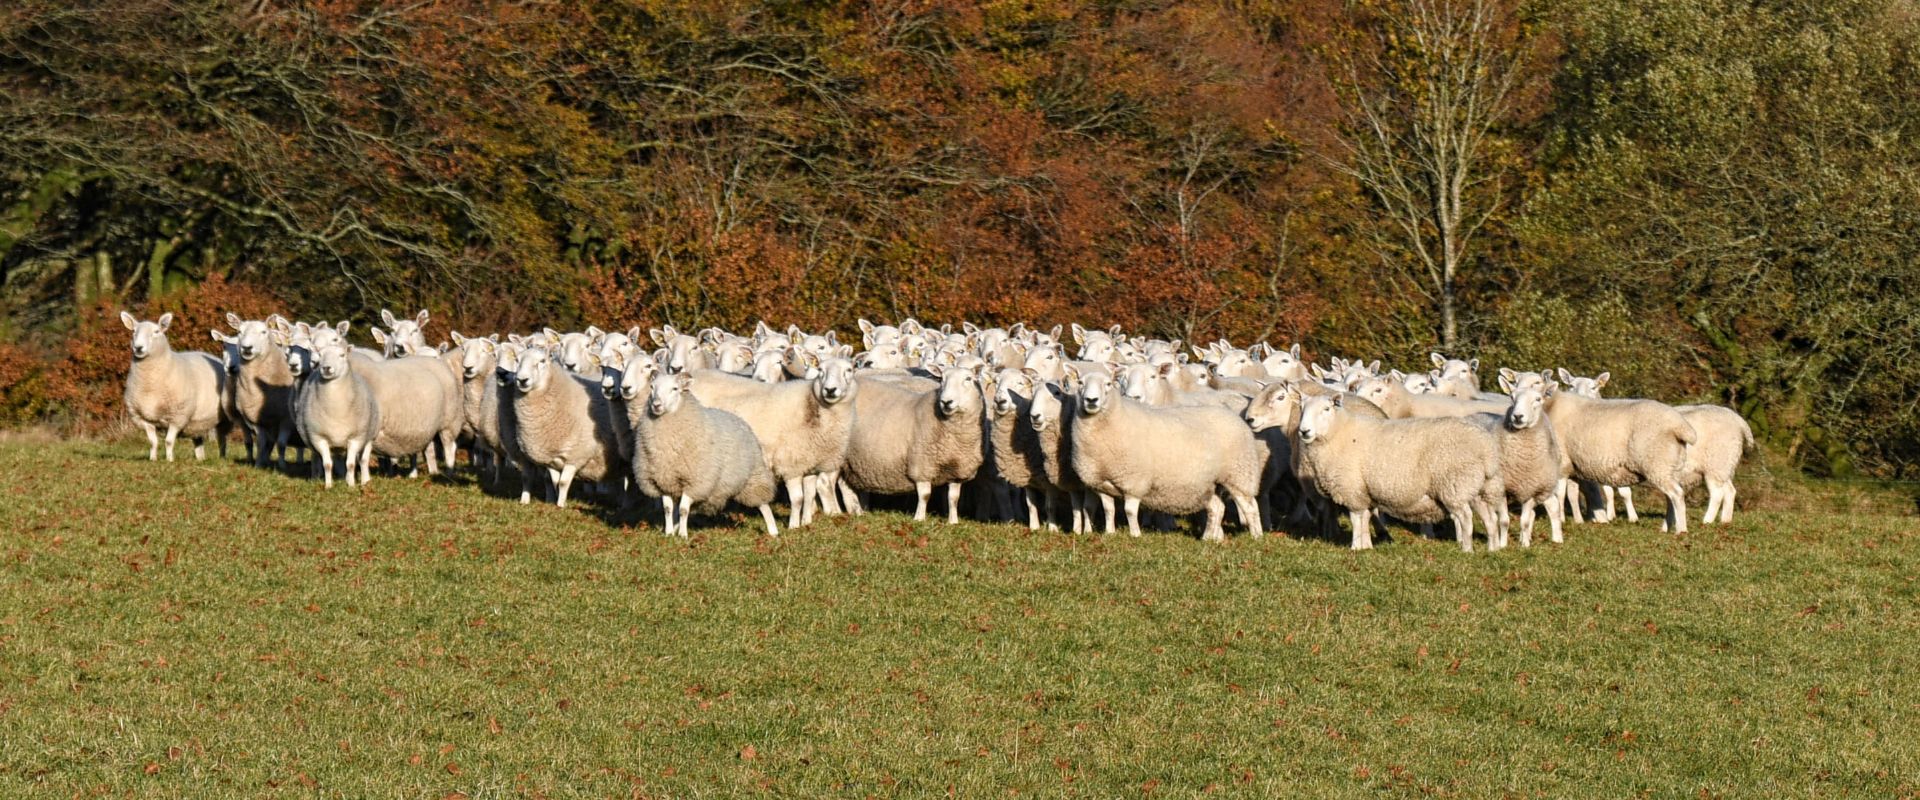 A flock of sheep having been herded